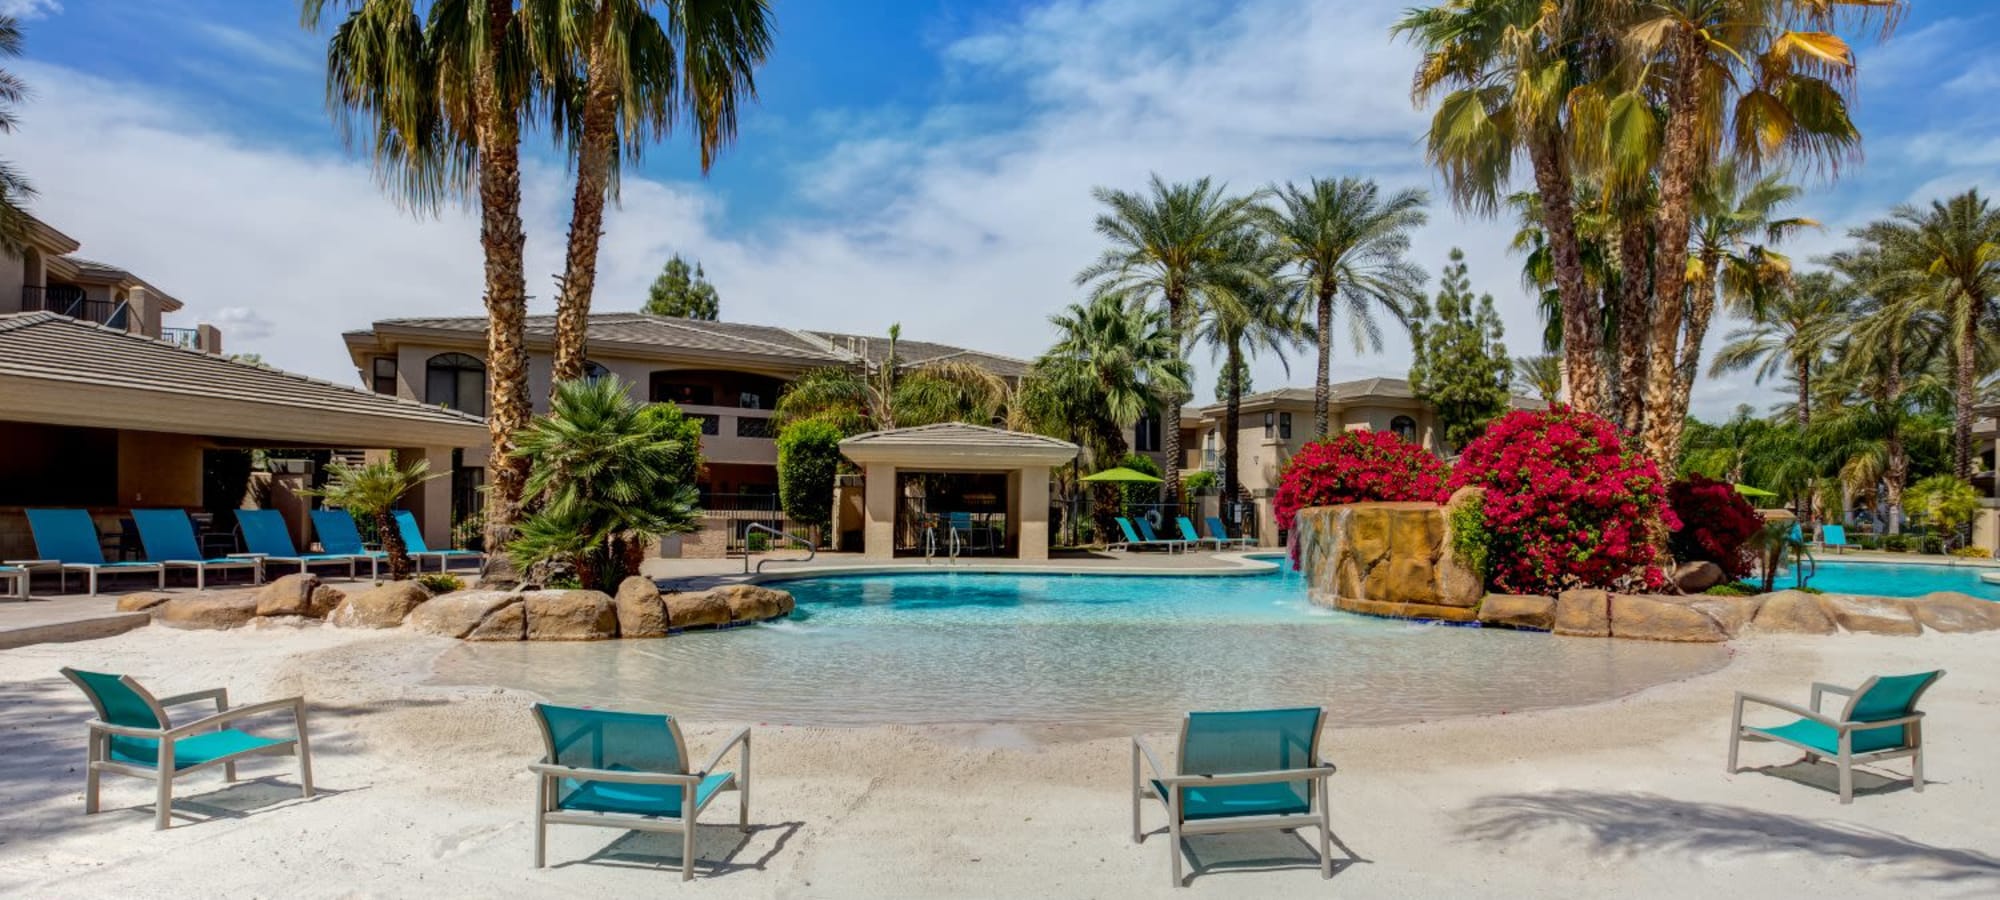 Tons of lounge chairs to relax and sun bathe on a sunny day at Ascend at Kierland in Scottsdale, Arizona